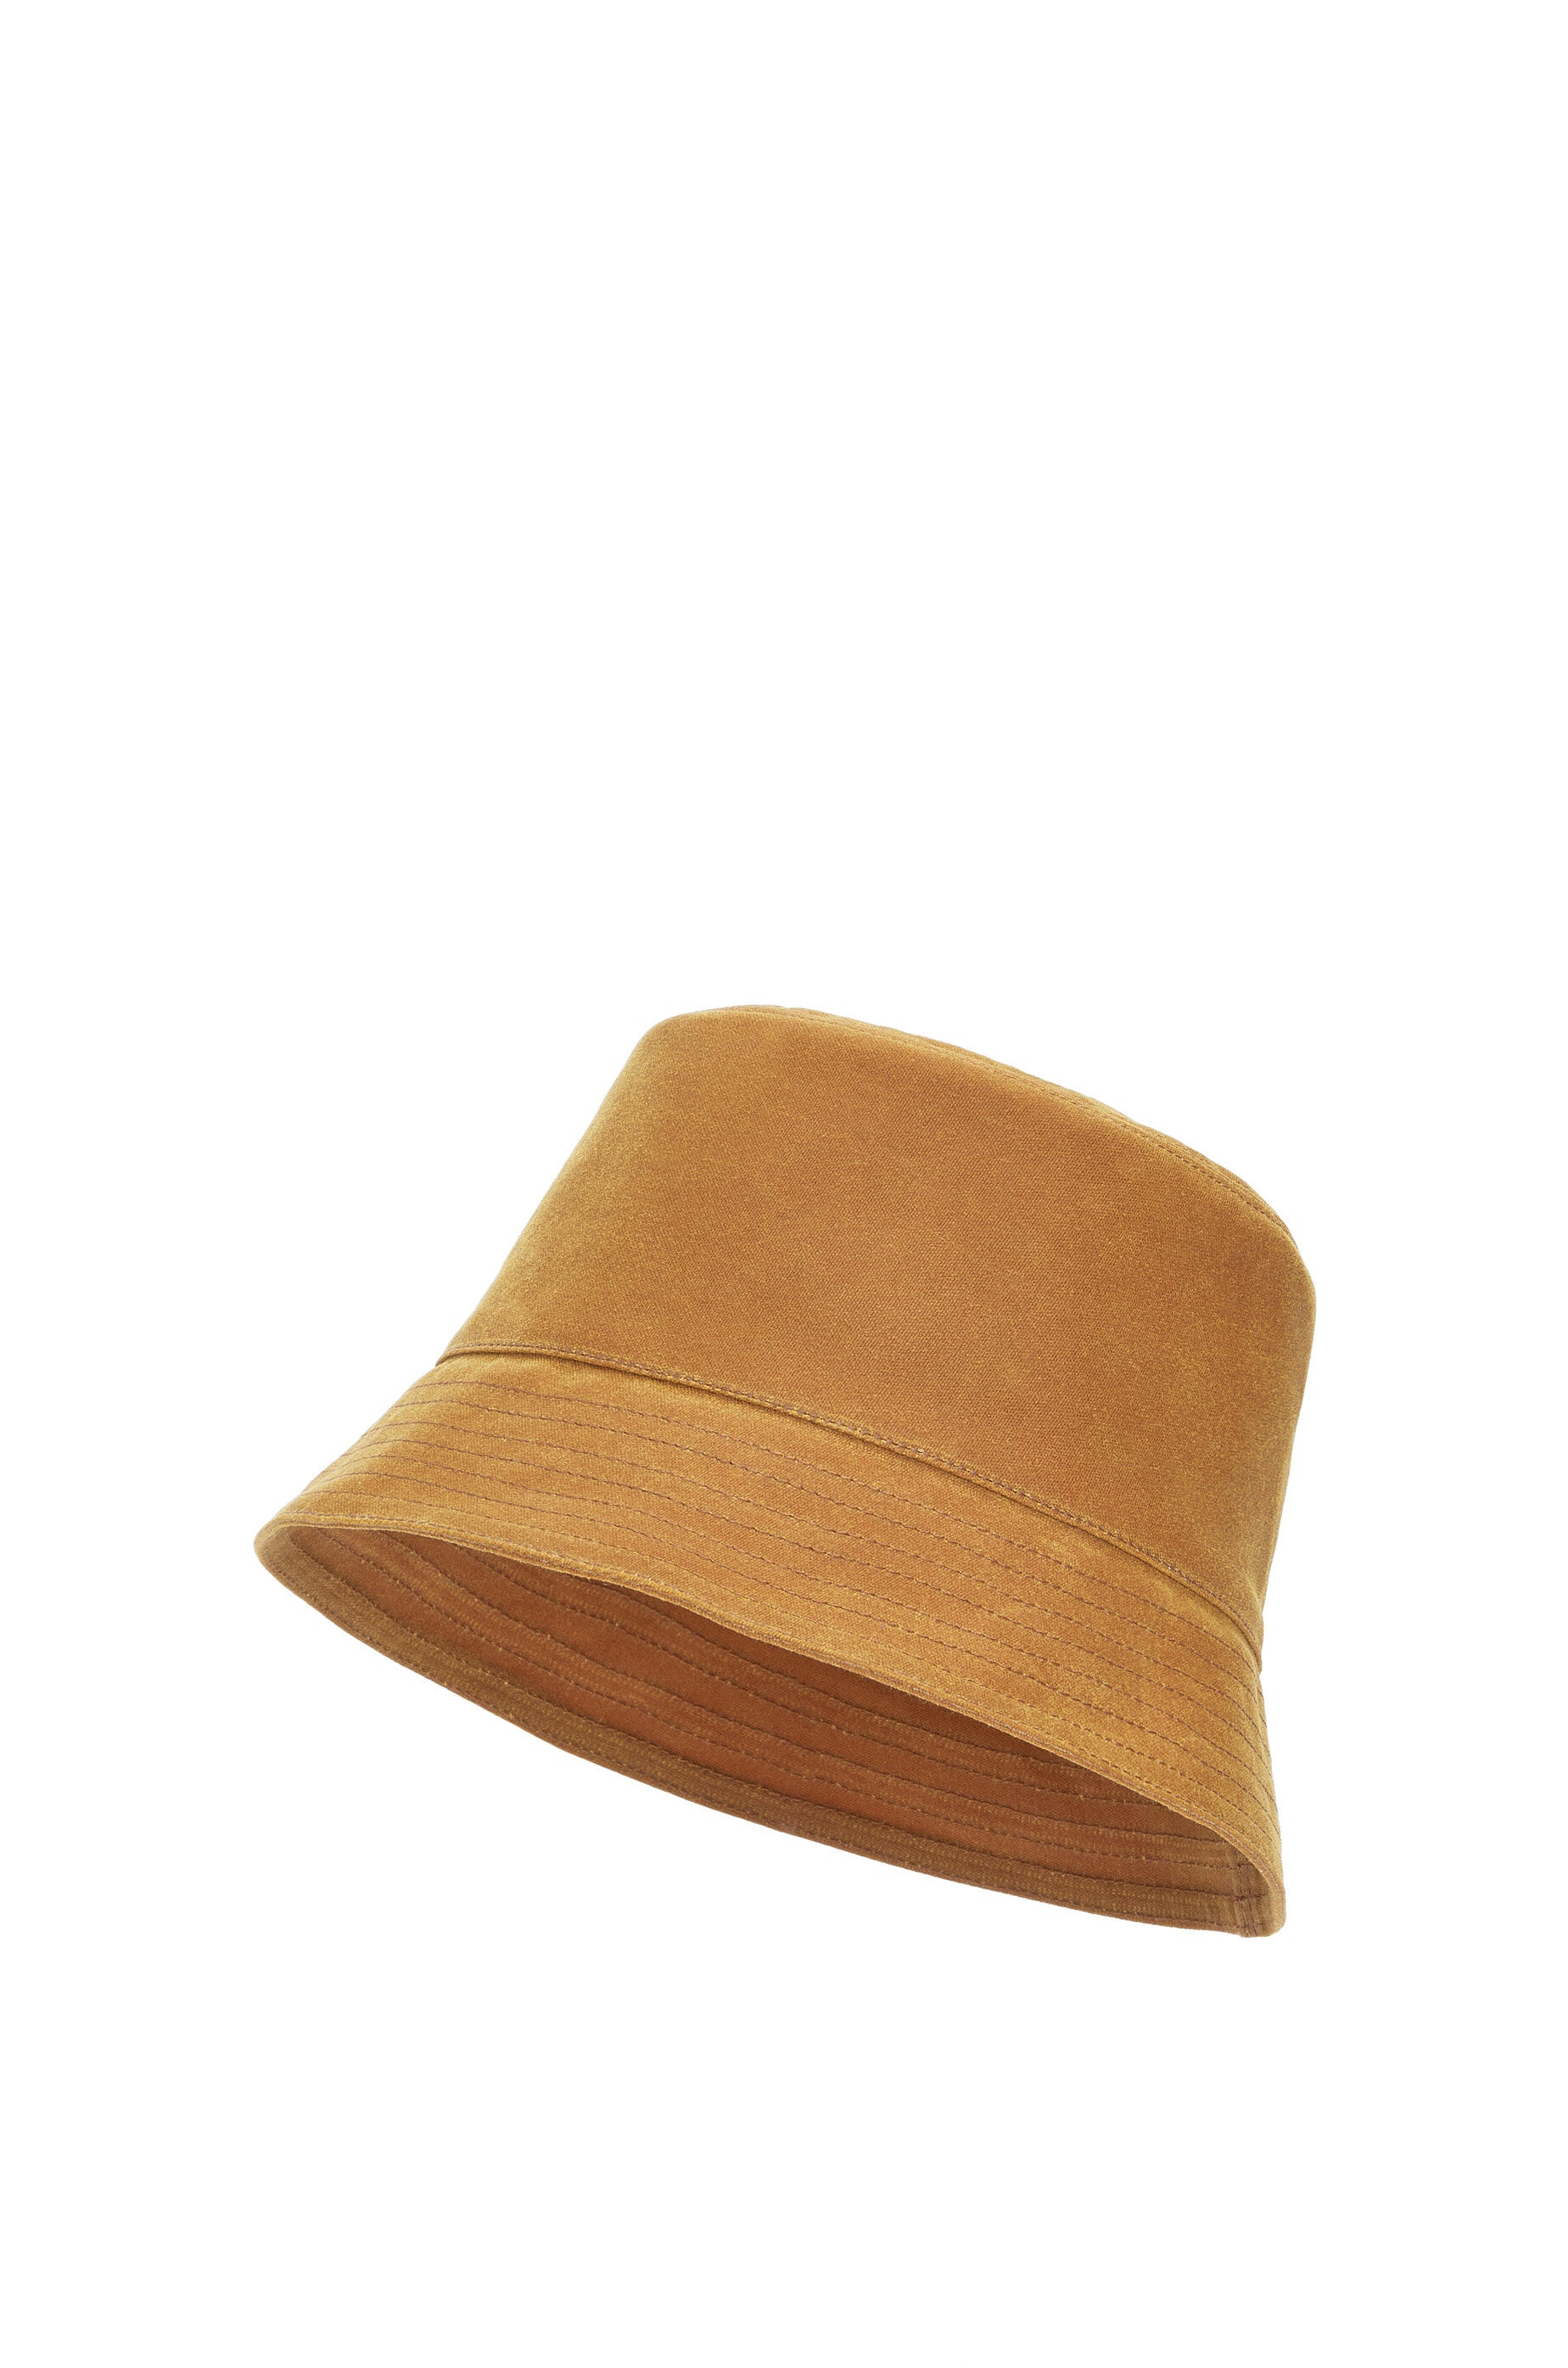 Bucket hat in waxed canvas and calfskin - 2